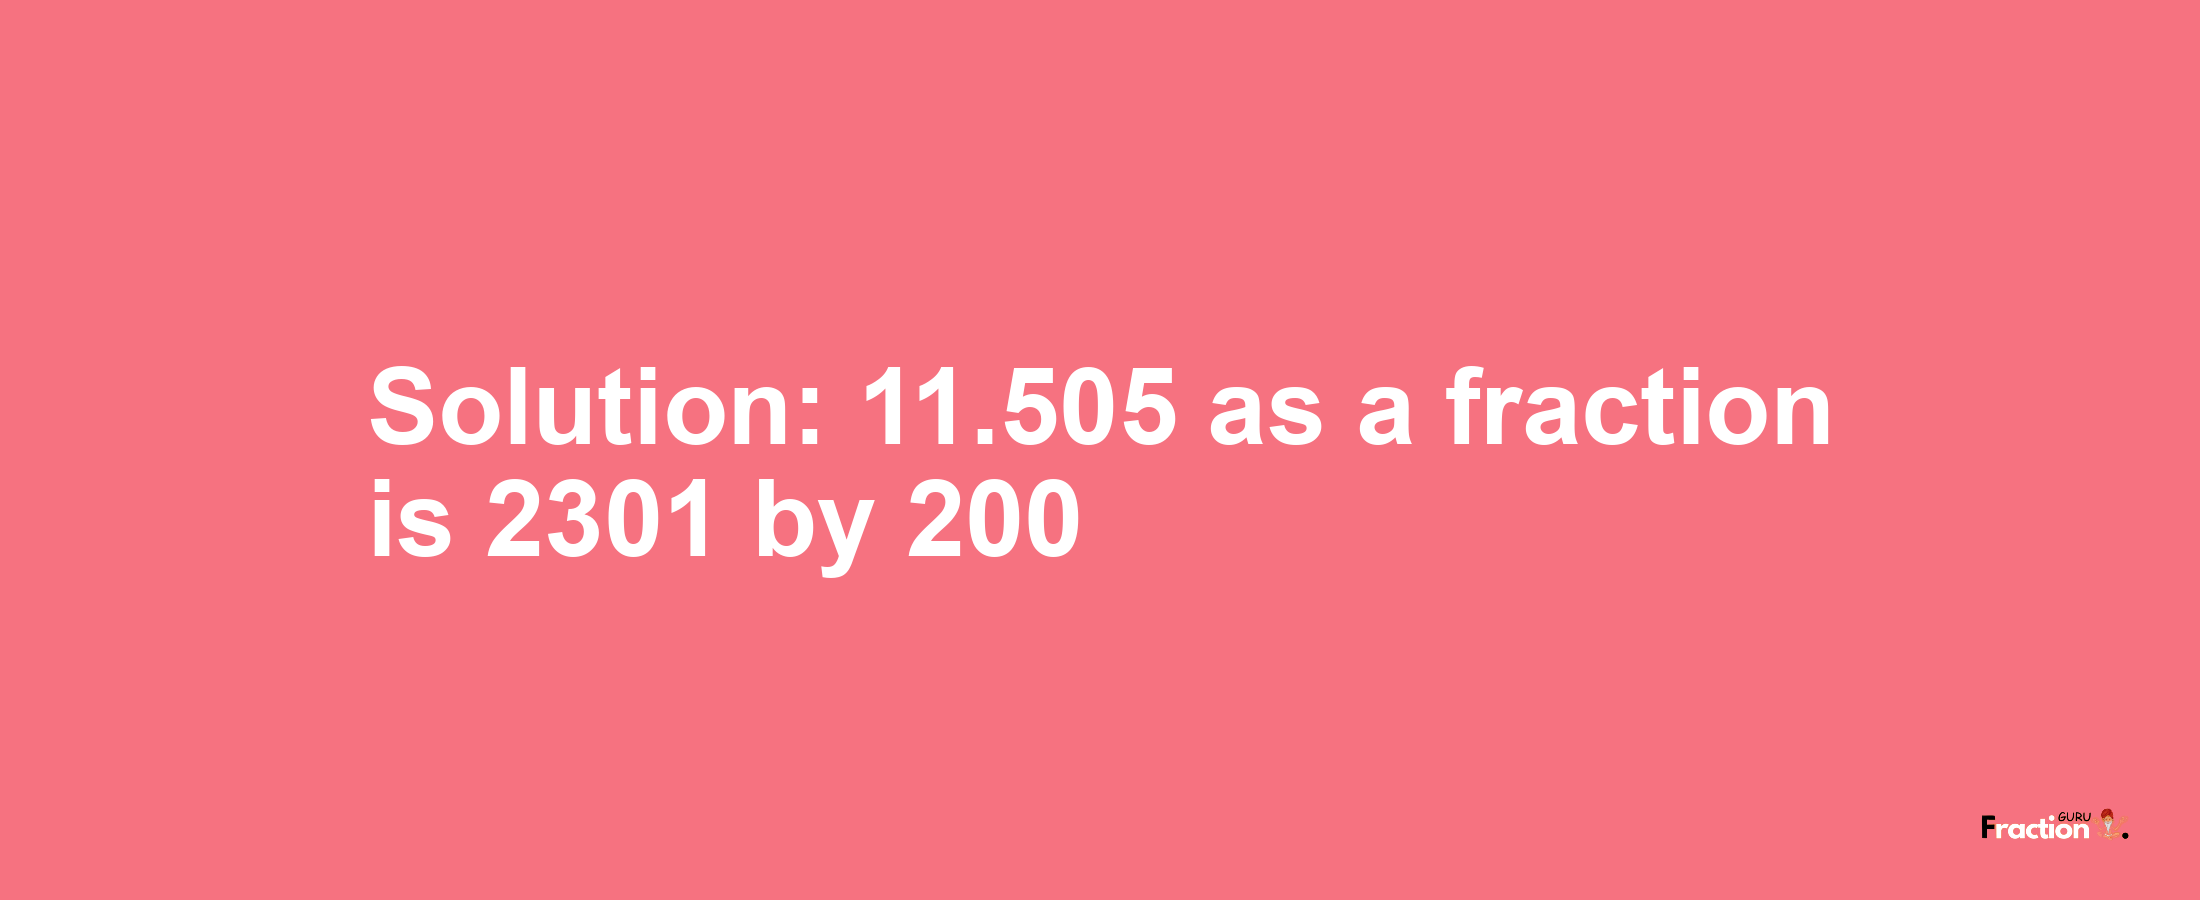 Solution:11.505 as a fraction is 2301/200